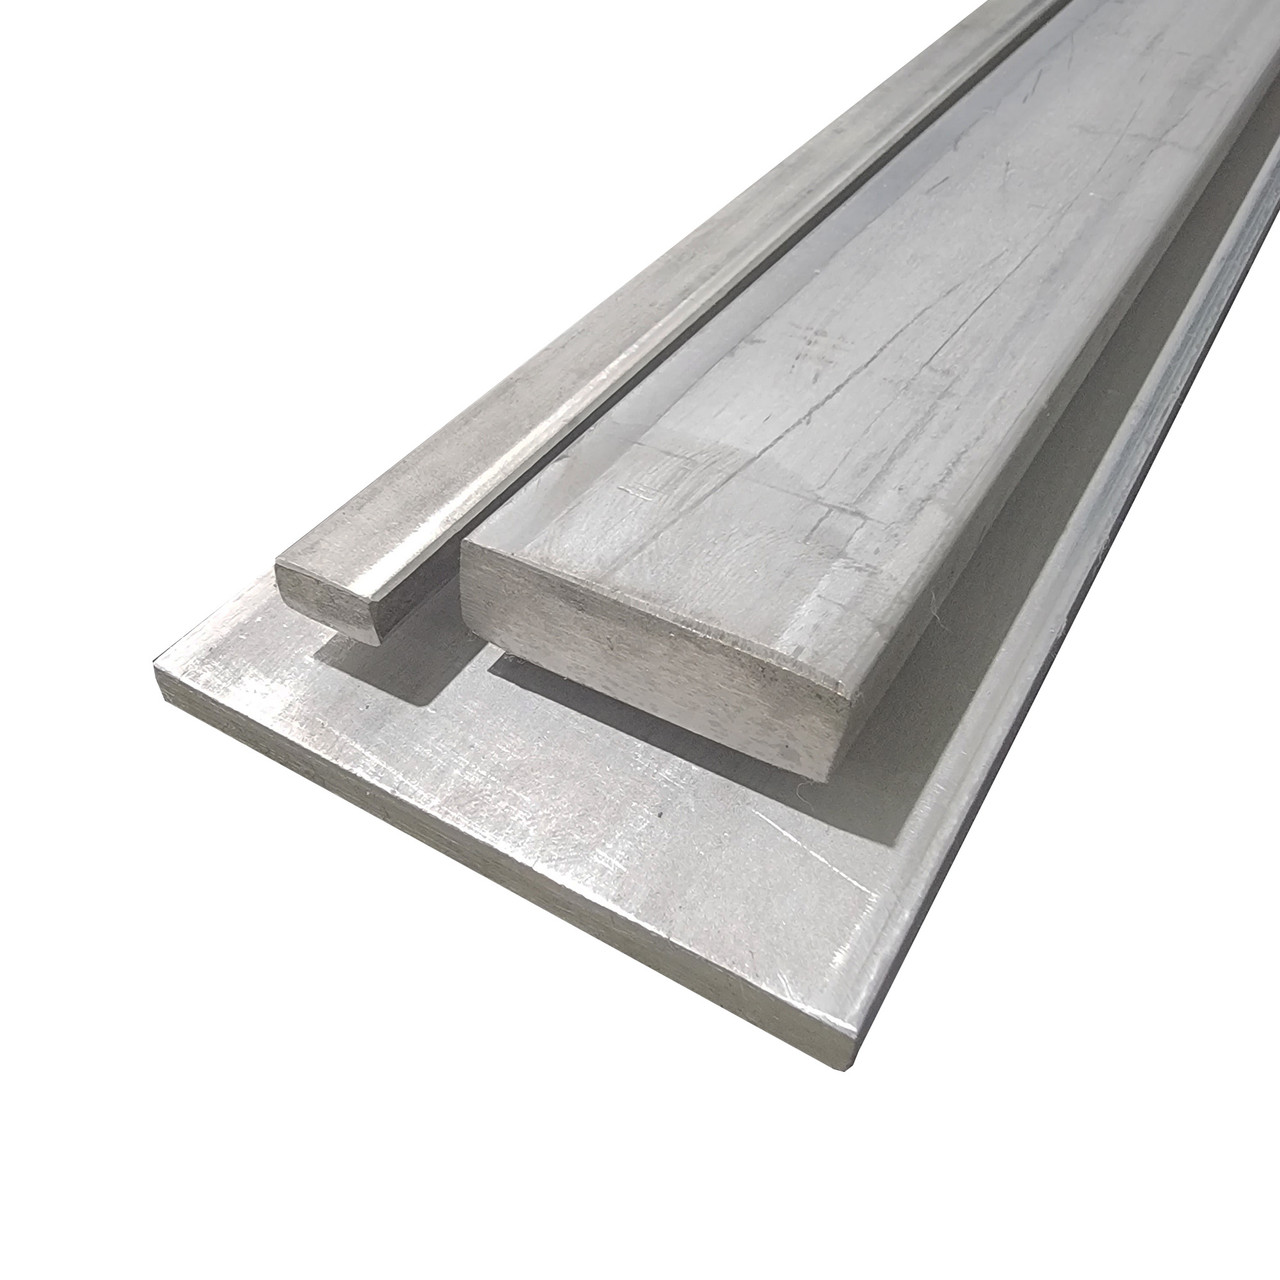 0.375" x 1" x 60", 304 Stainless Steel Plate Flat Bar, Hot Rolled